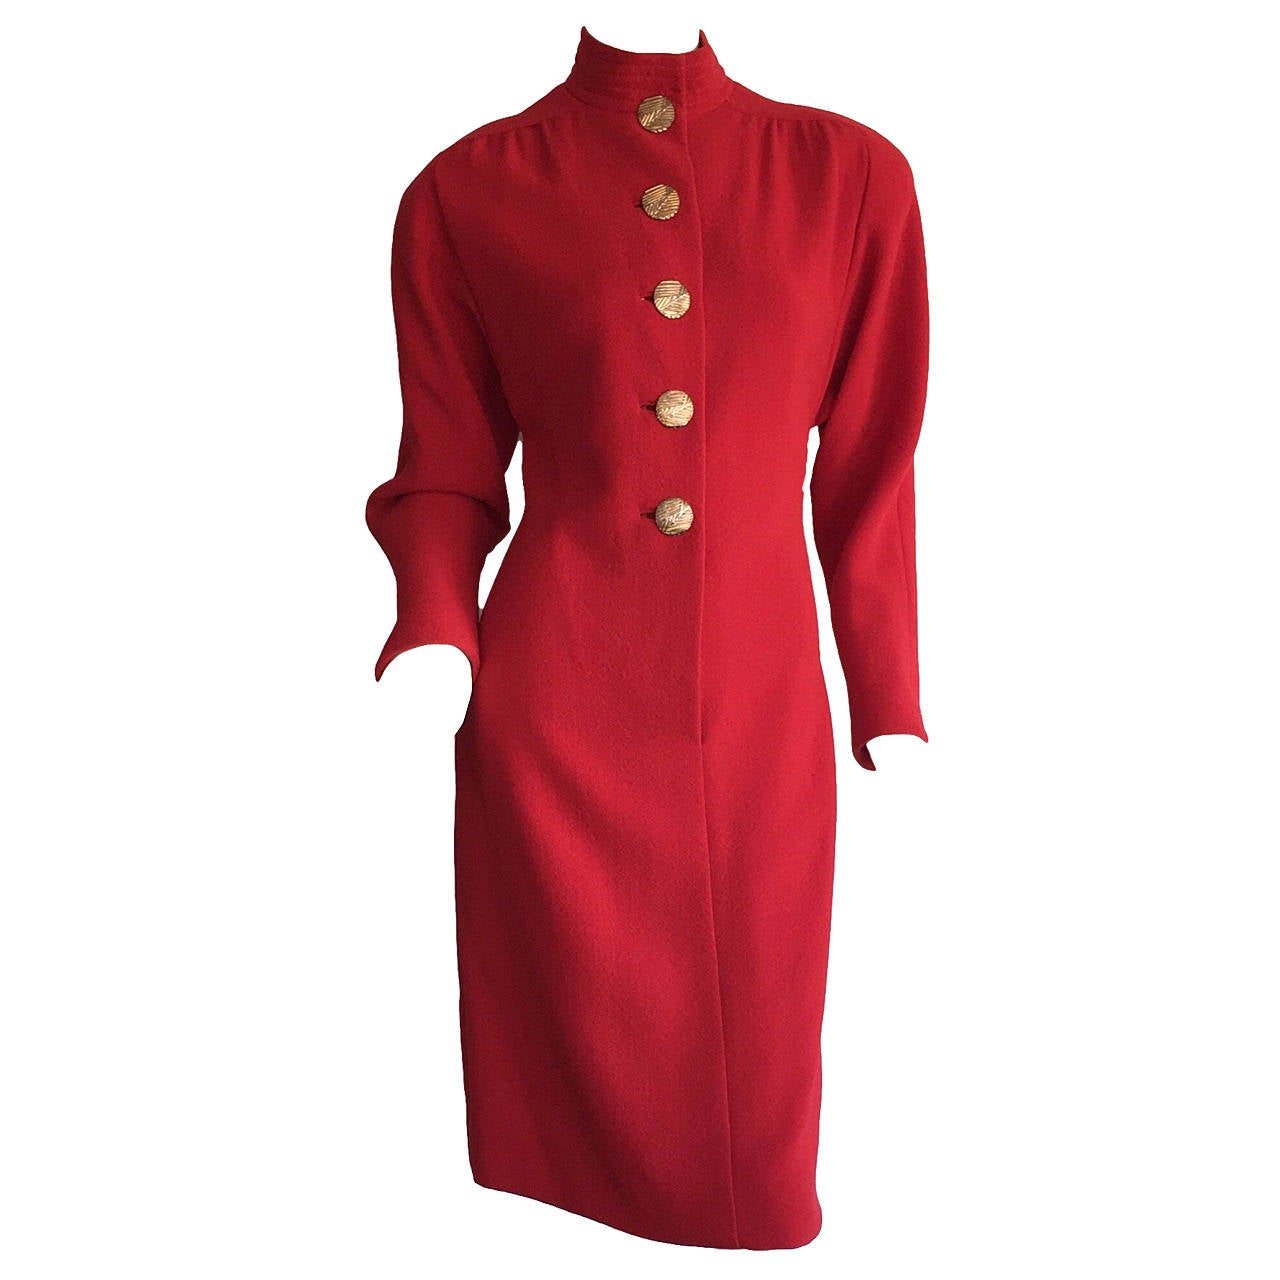 Beautiful Vintage James Galanos Lipstick Red Dress, w/ Gold Buttons